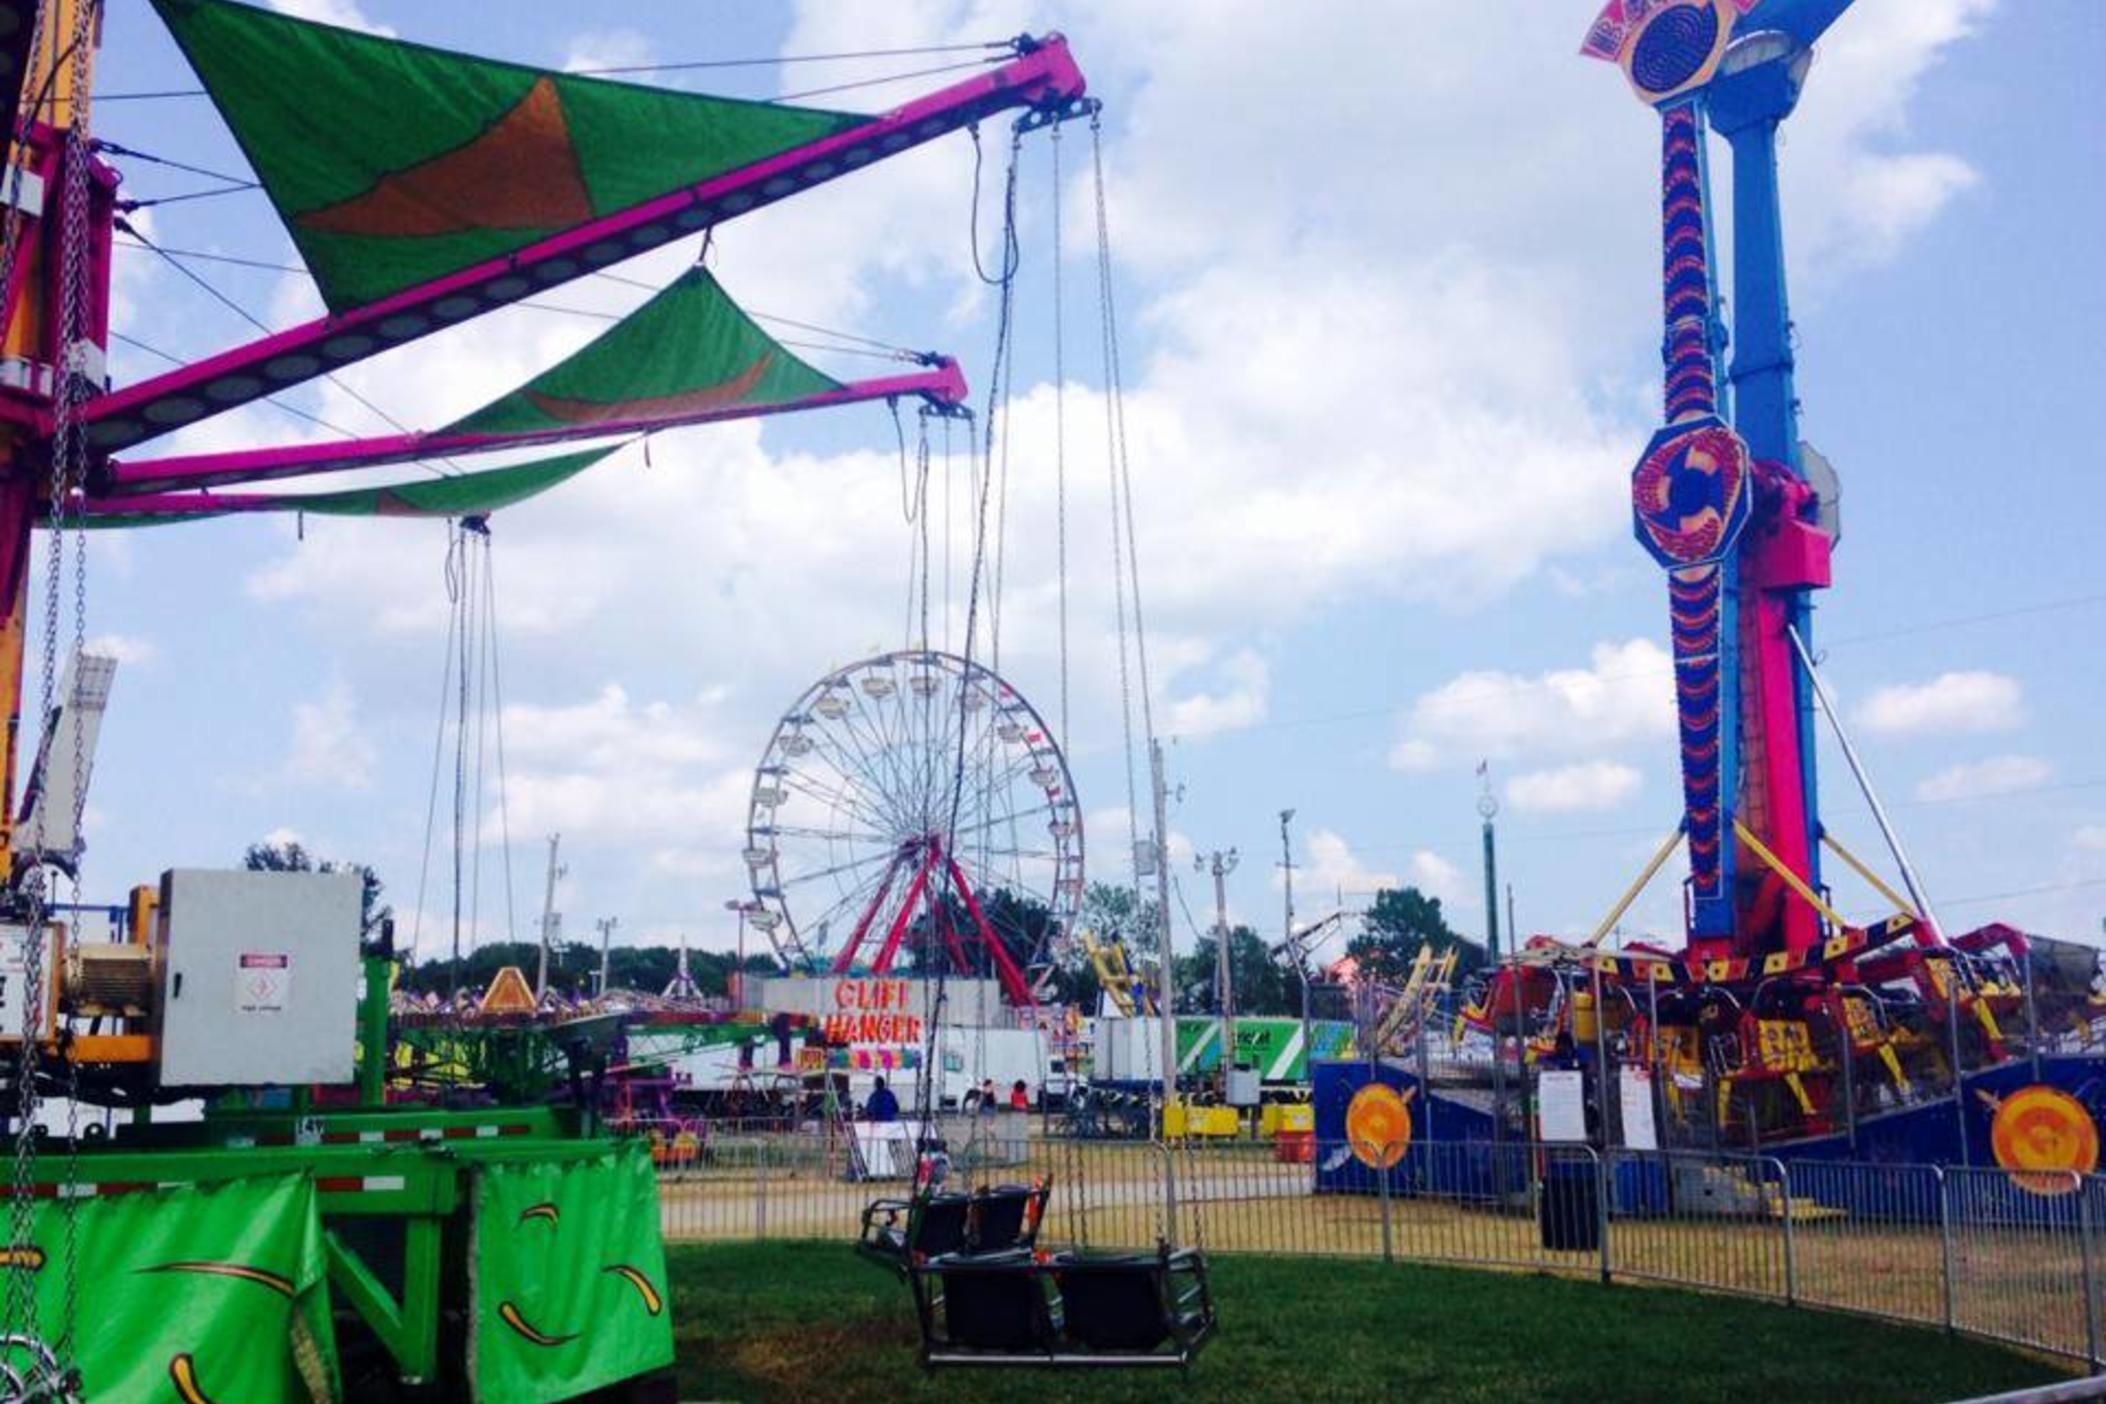 17th Annual State Fair To Go On In Spite Of COVID19 Pandemic